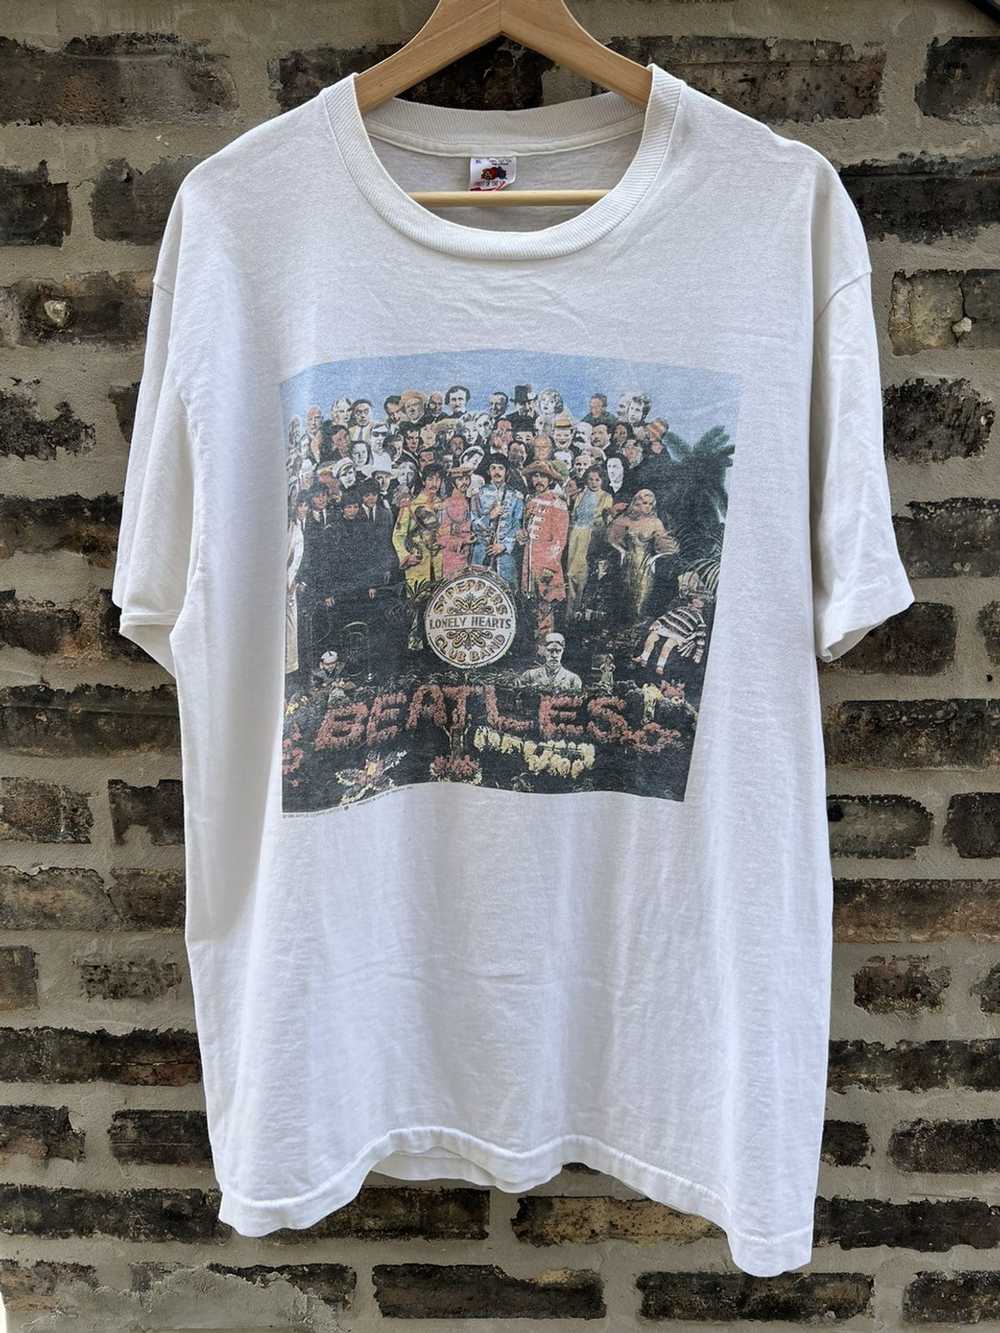 Band Tees × Vintage The Beatles 1990 lonely hearts - image 1